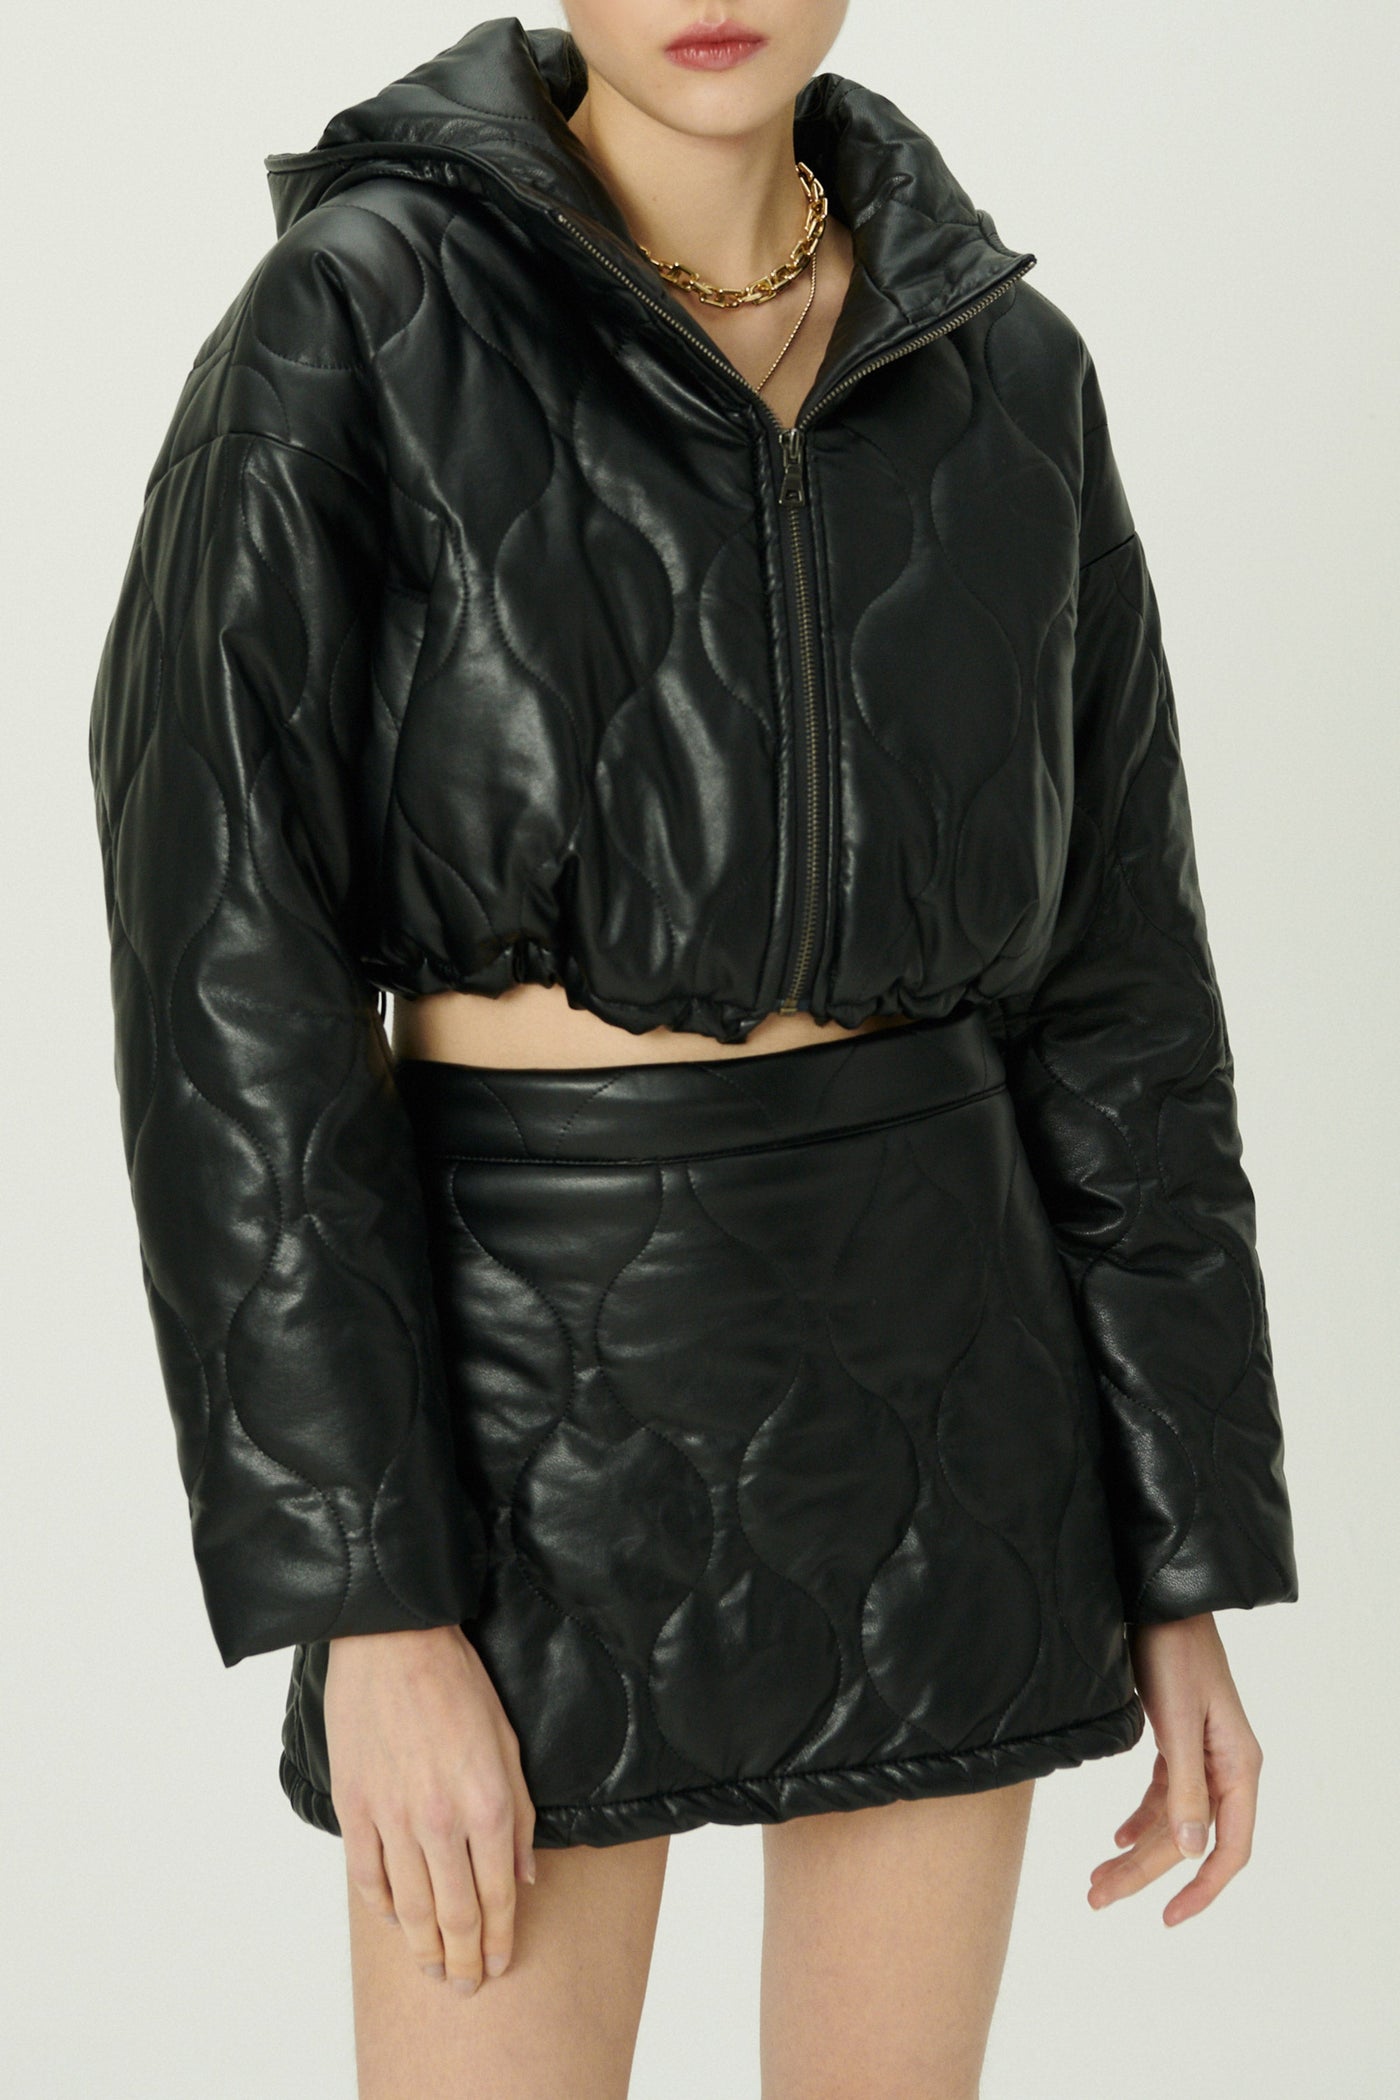 storets.com Anina Pleather Quilted Jacket